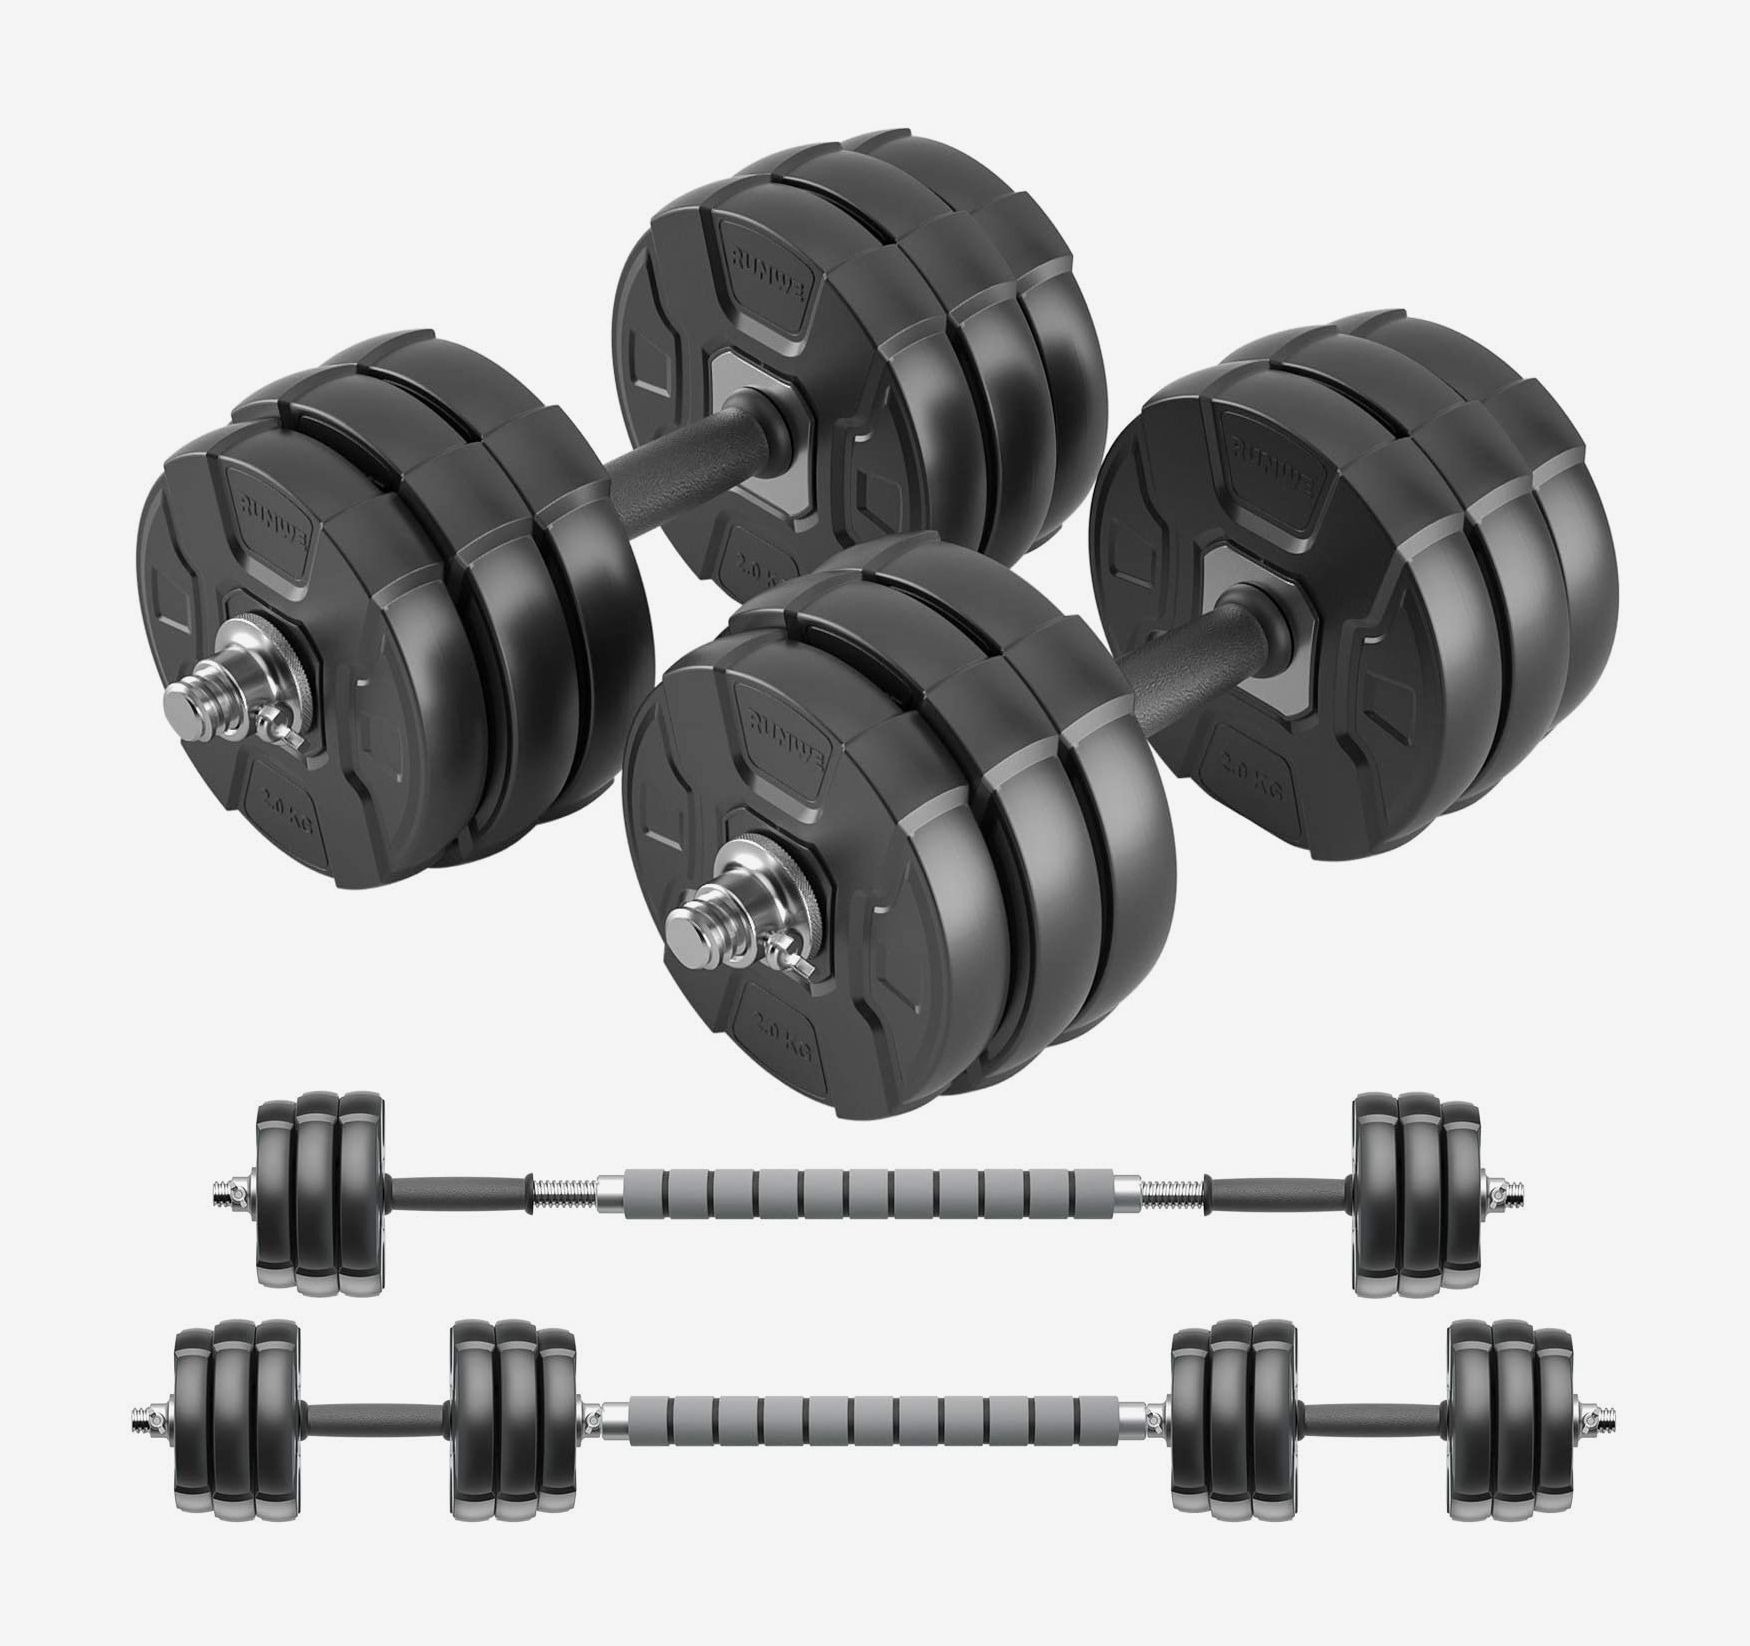 Dumbbells Set Heavy Weights Hex Dumbell Set Hexagonal Rubber Dumbbell with Metal Handles Anti-Rolling for Weightlifting Bodybuilding Exercise Fitness Workout Training Home Gym 10-30kg Single & Sets